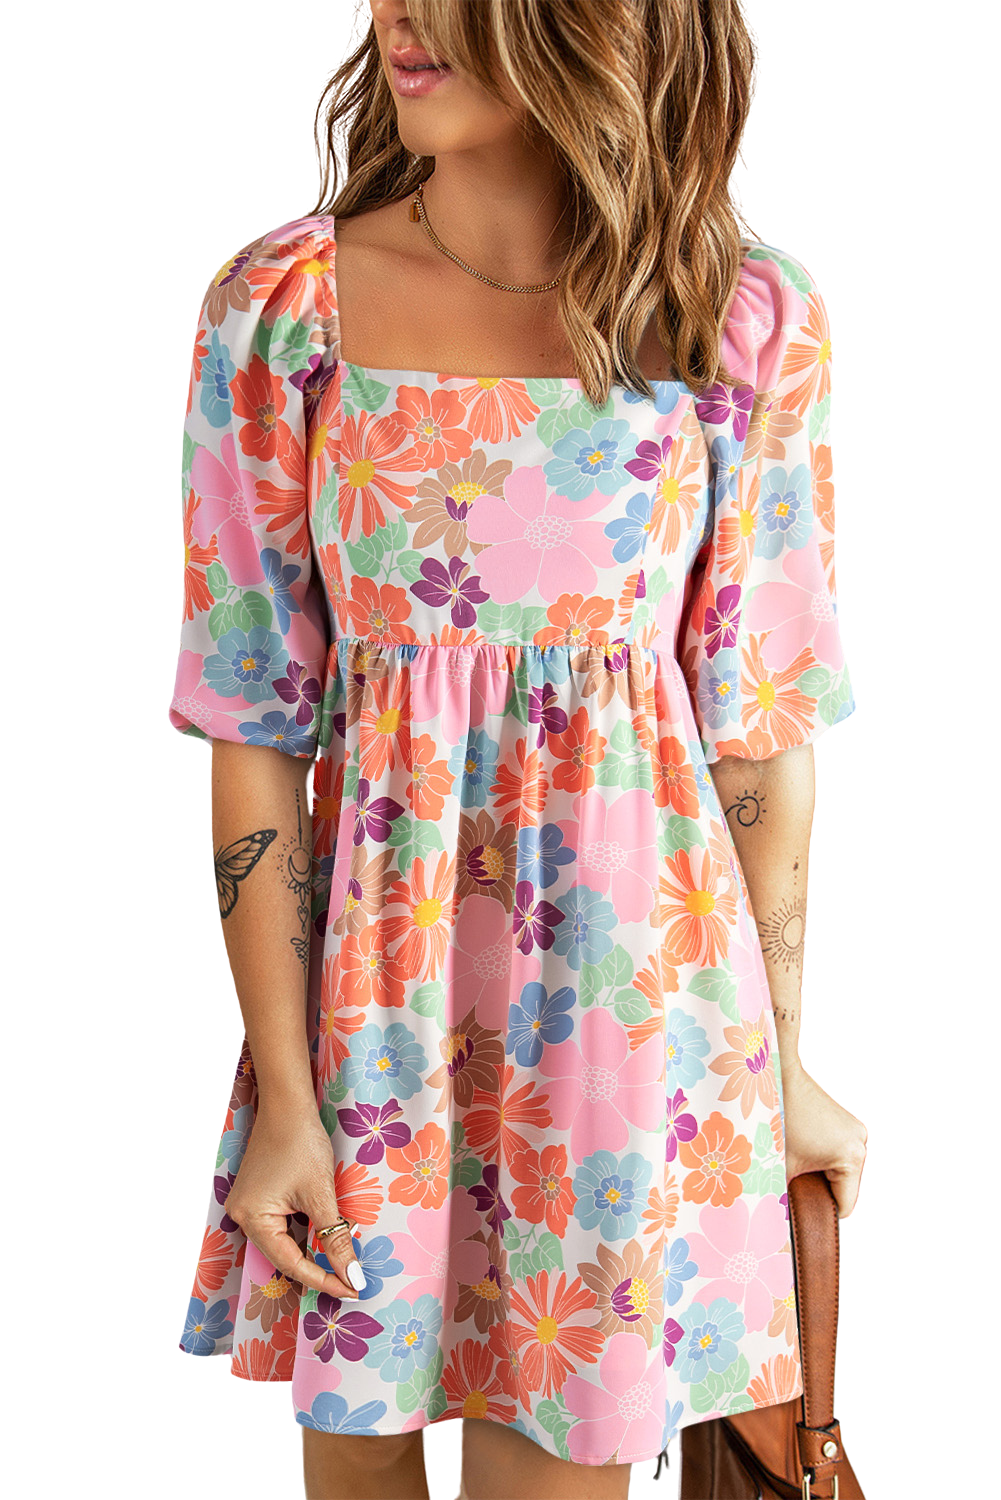 Embrace summer with this floral Printed Half Sleeve Mini Dress, perfect for any occasion. Fresh, flirty, and fabulously feminine!